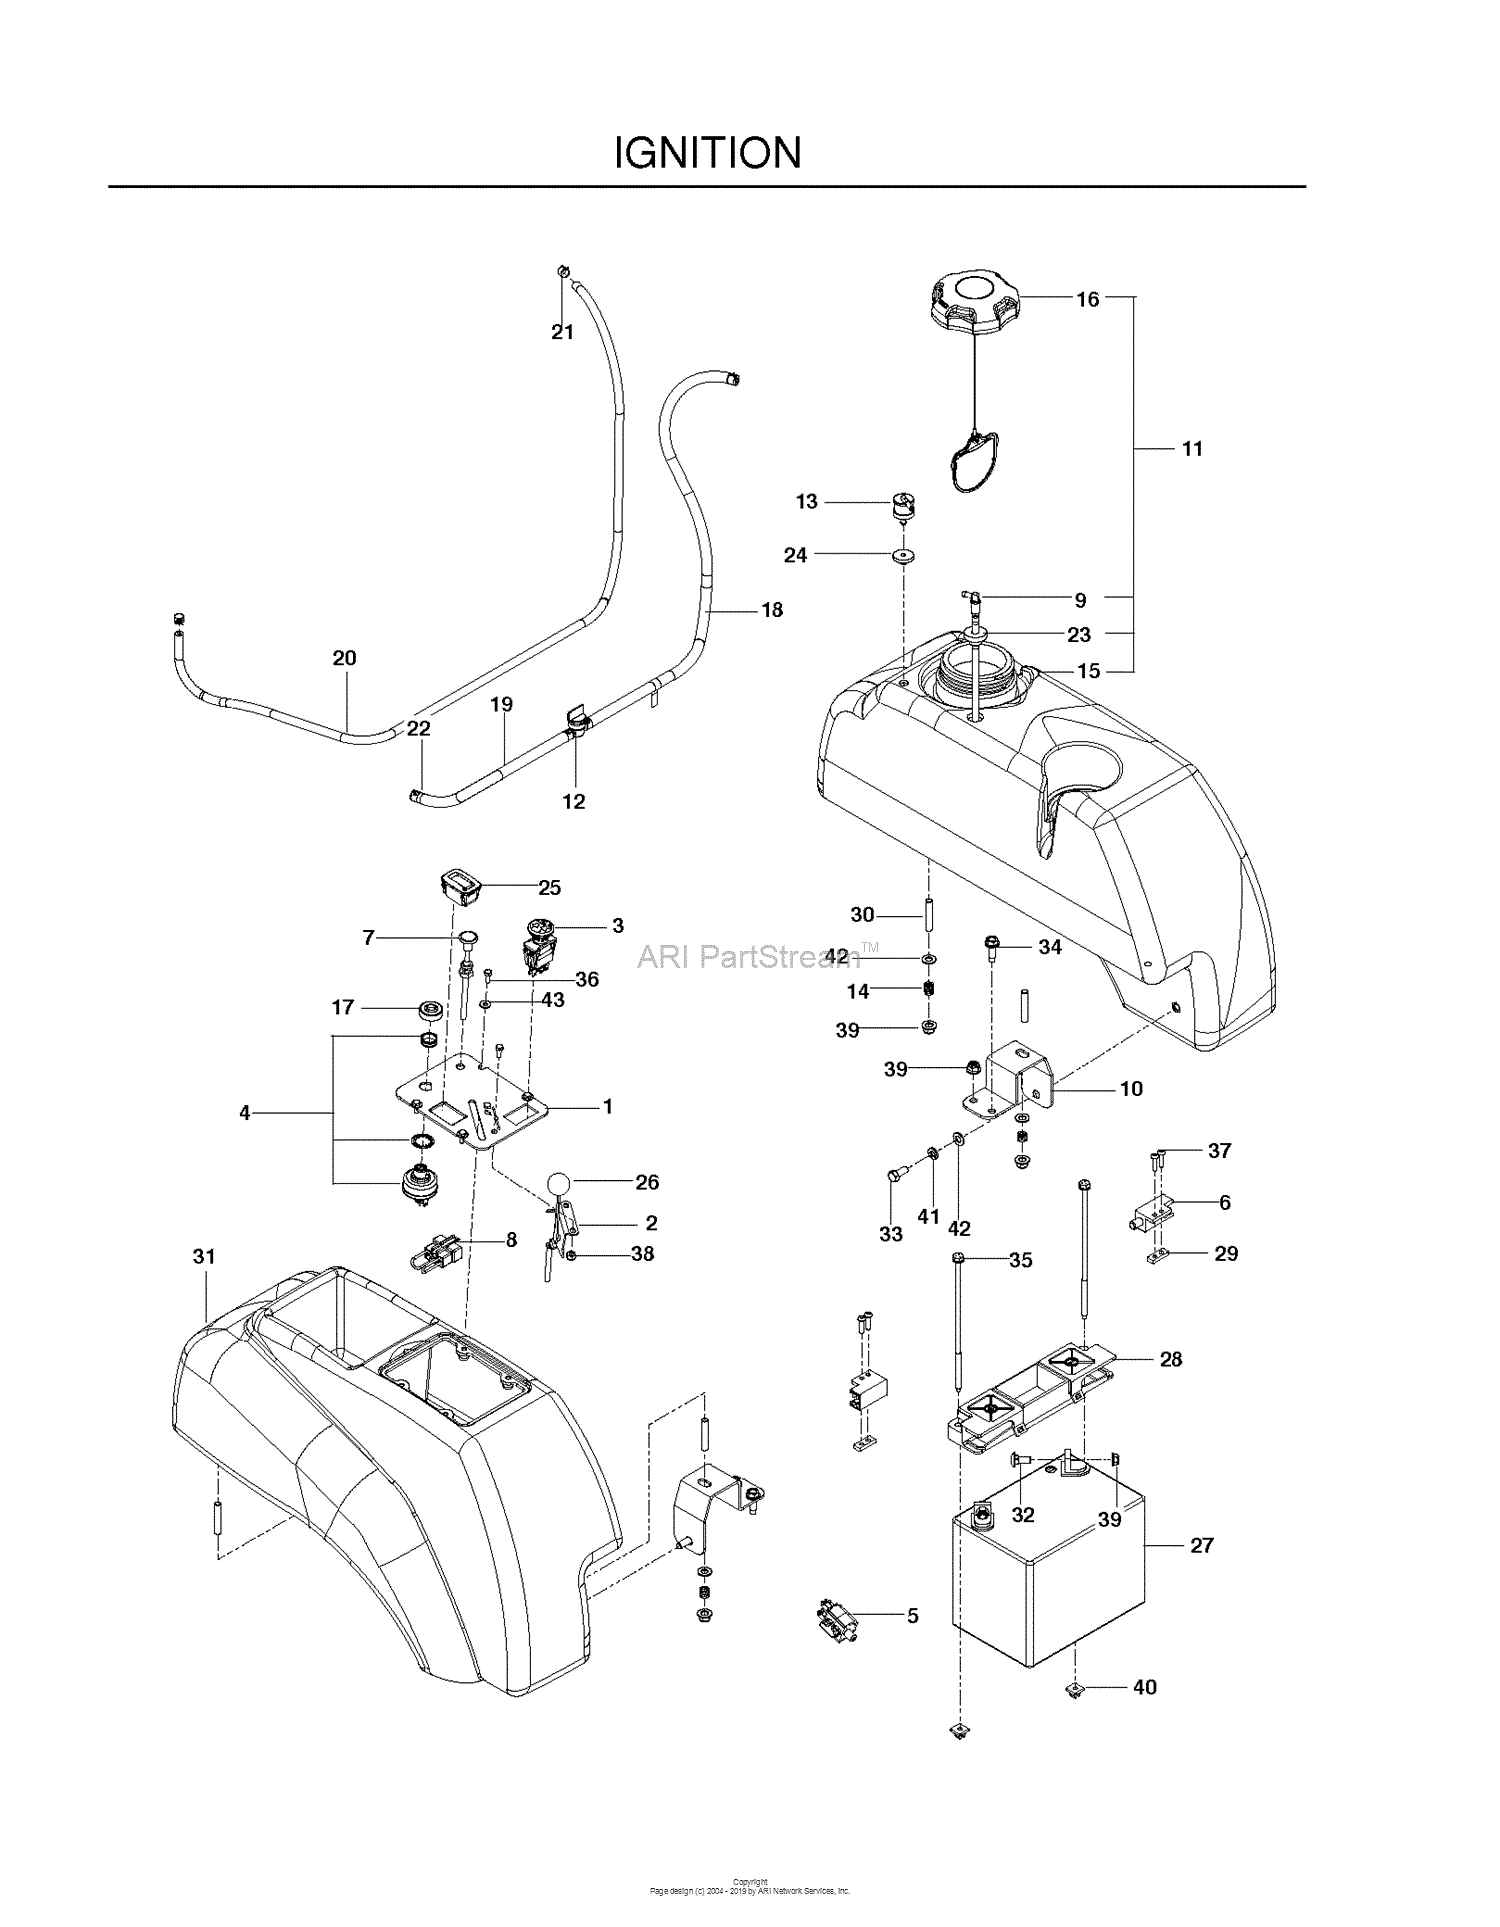 Husqvarna MZ 5424 S - 967003901 (2012-01) Parts Diagram for IGNITION SYSTEM